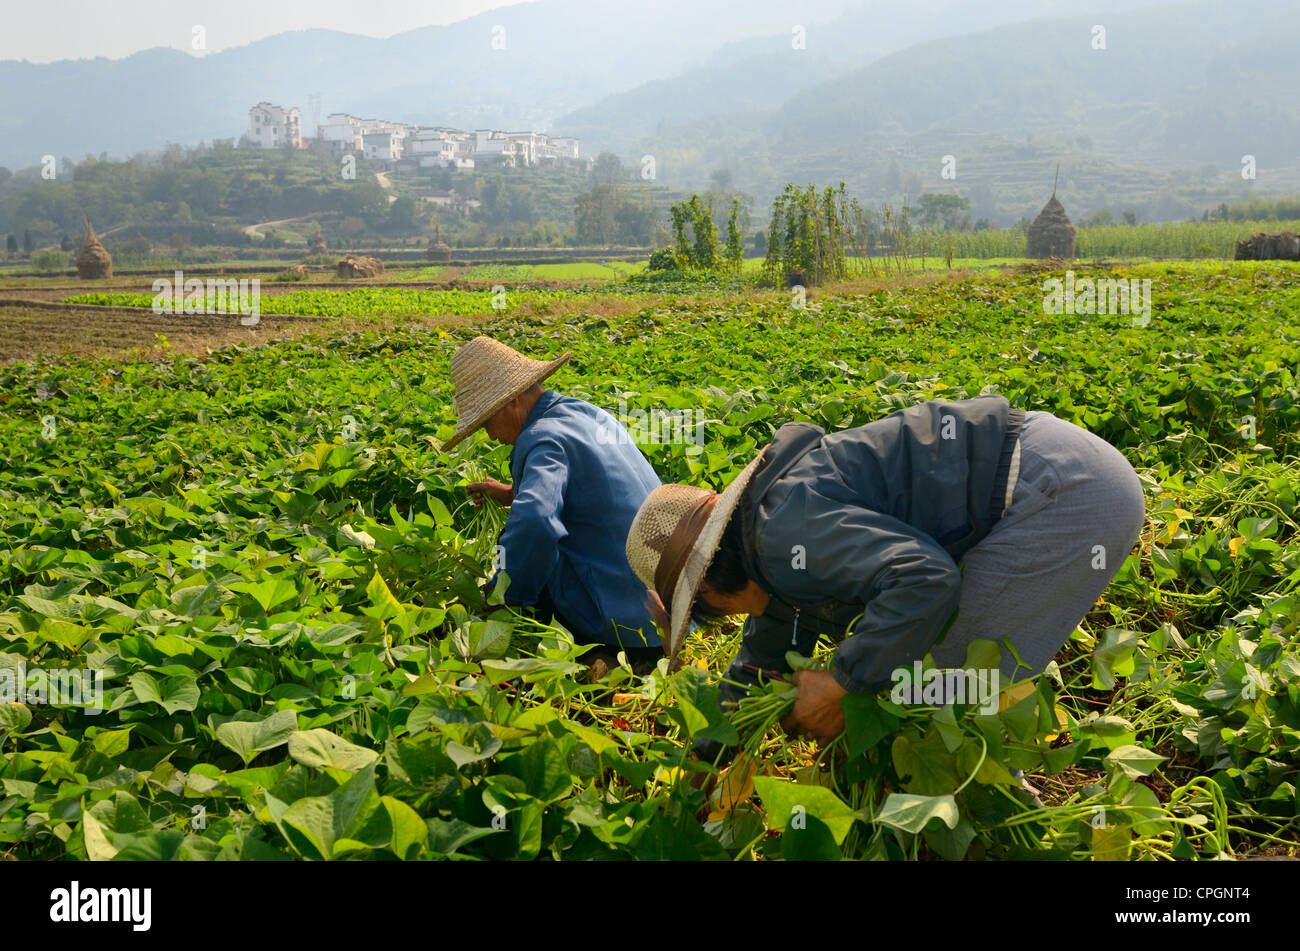 Man and women harvesting potato leaves for pig feed on valley farmland at Yanggancun Huangshan Anhui Province Peoples Republic of China Stock Photo